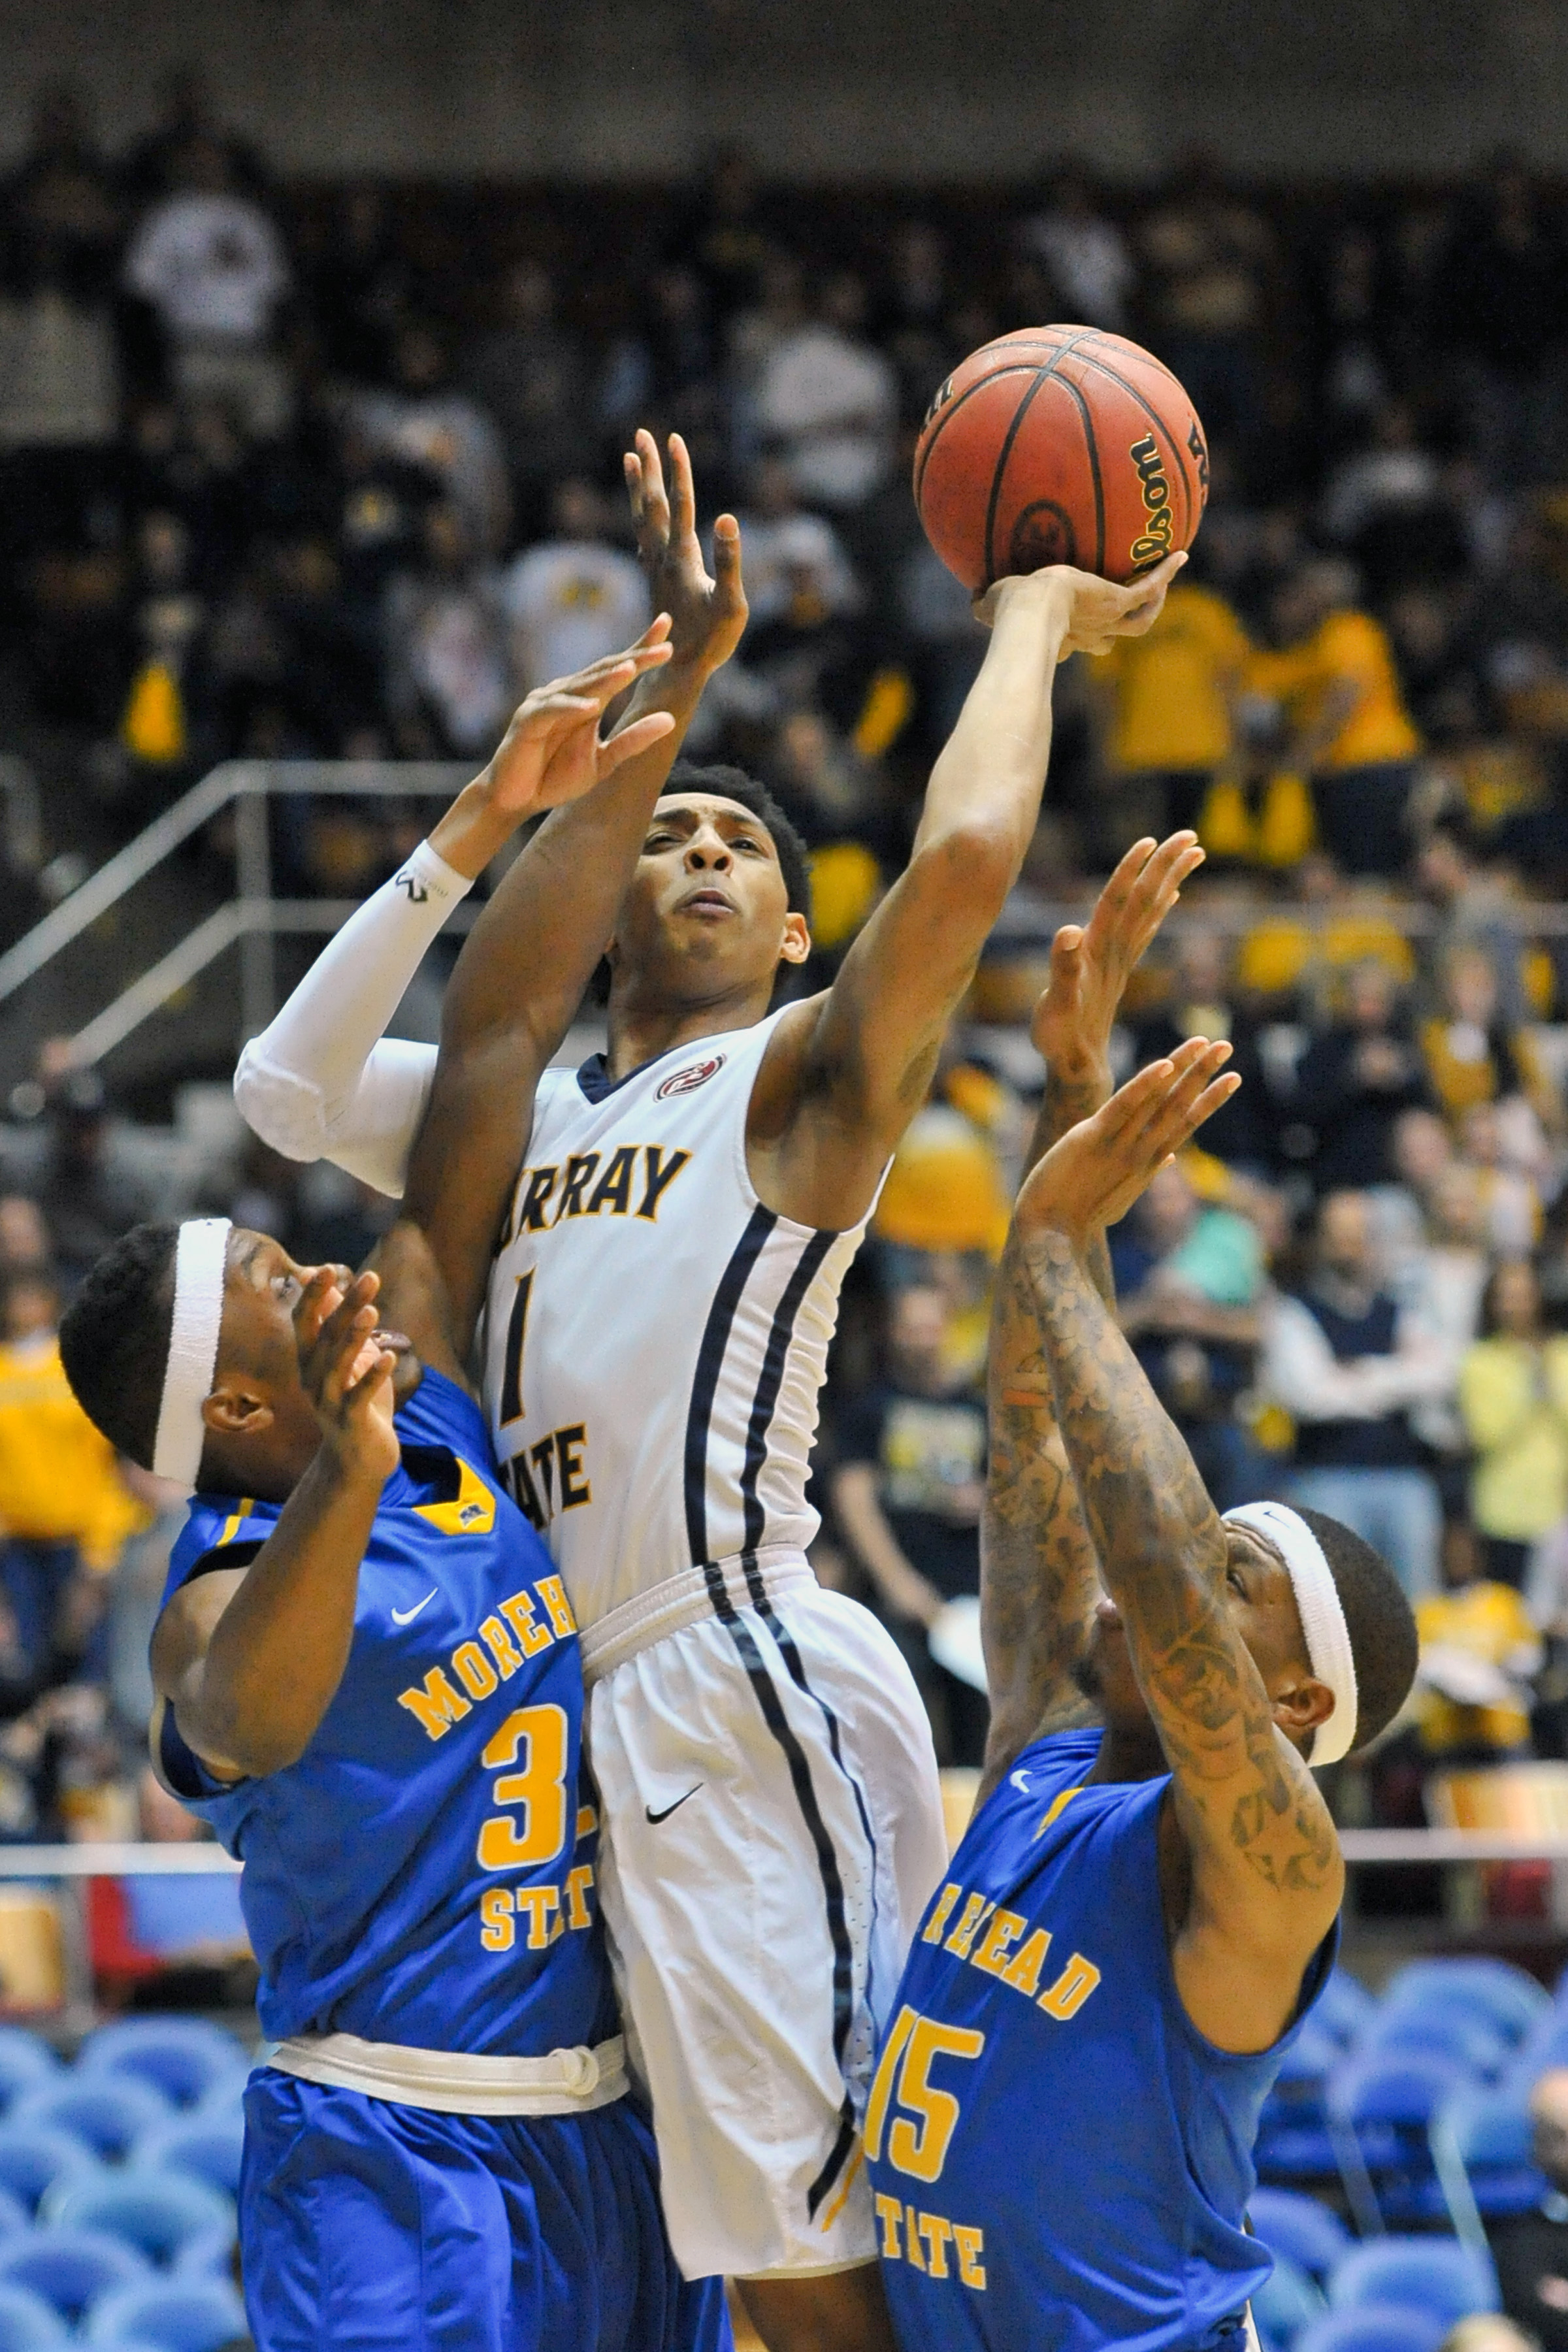 Who is the next Cameron Payne, a player who elevates his game and